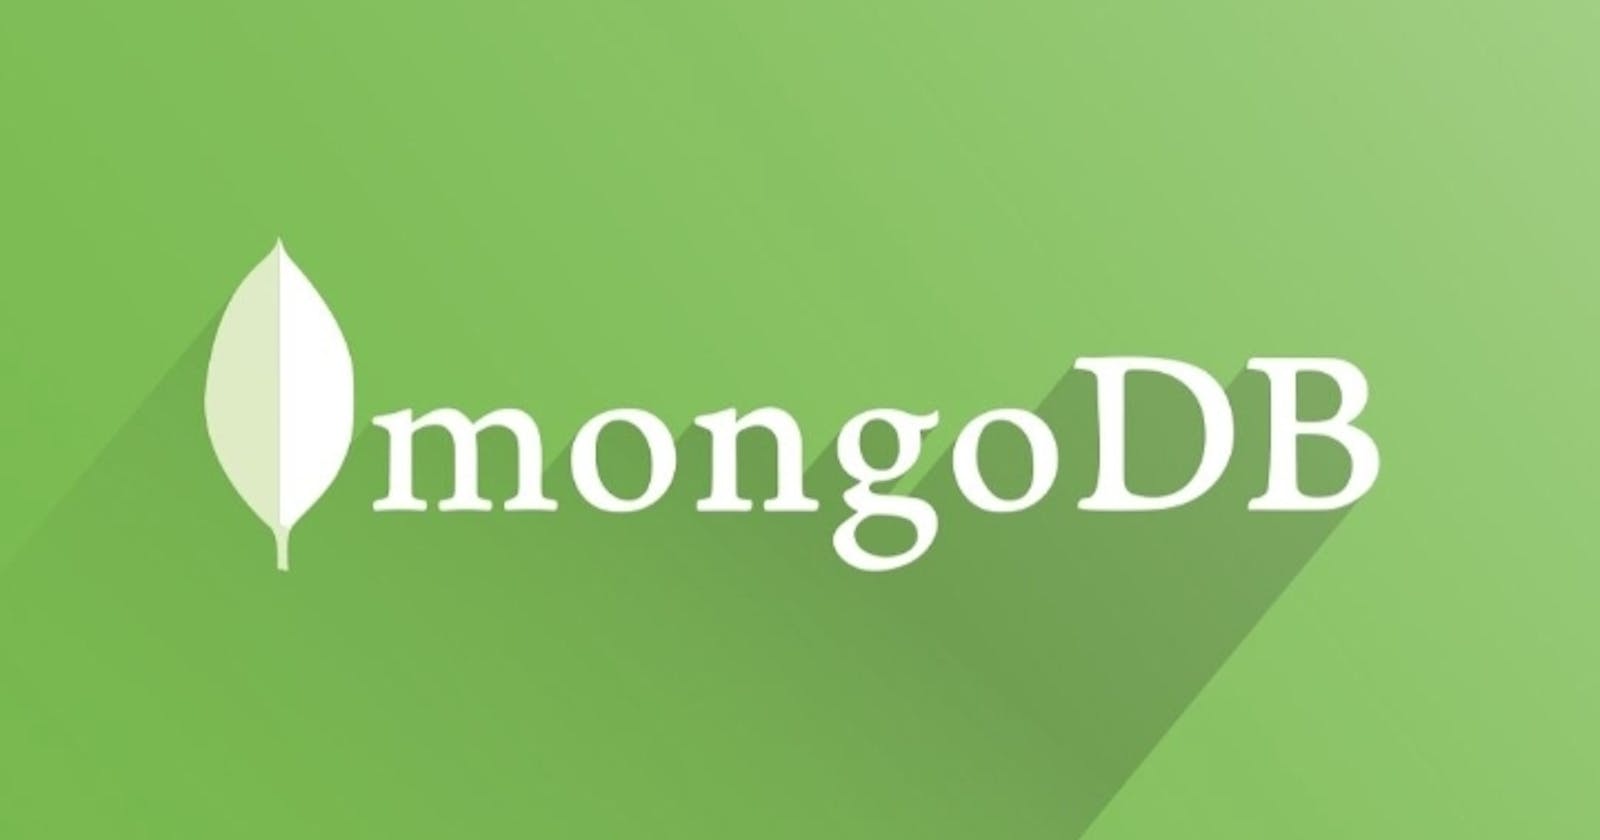 Getting Started with MongoDB a NoSQL database using the MongoDB Shell: A Beginner's Guide